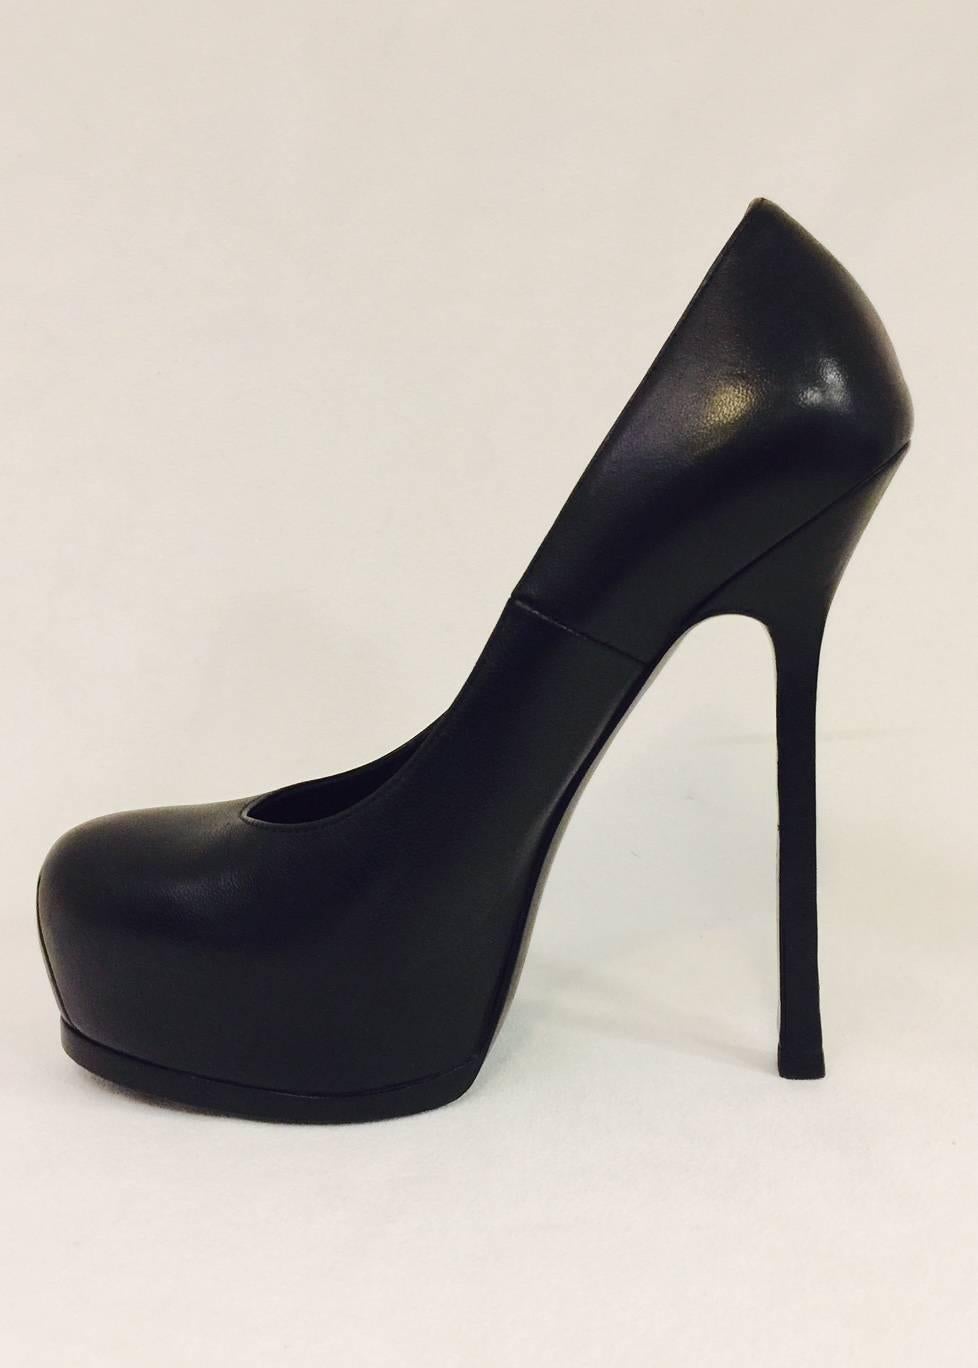 Women's Yves Saint Laurent Black Leather High Heel Pumps With Covered Platforms For Sale